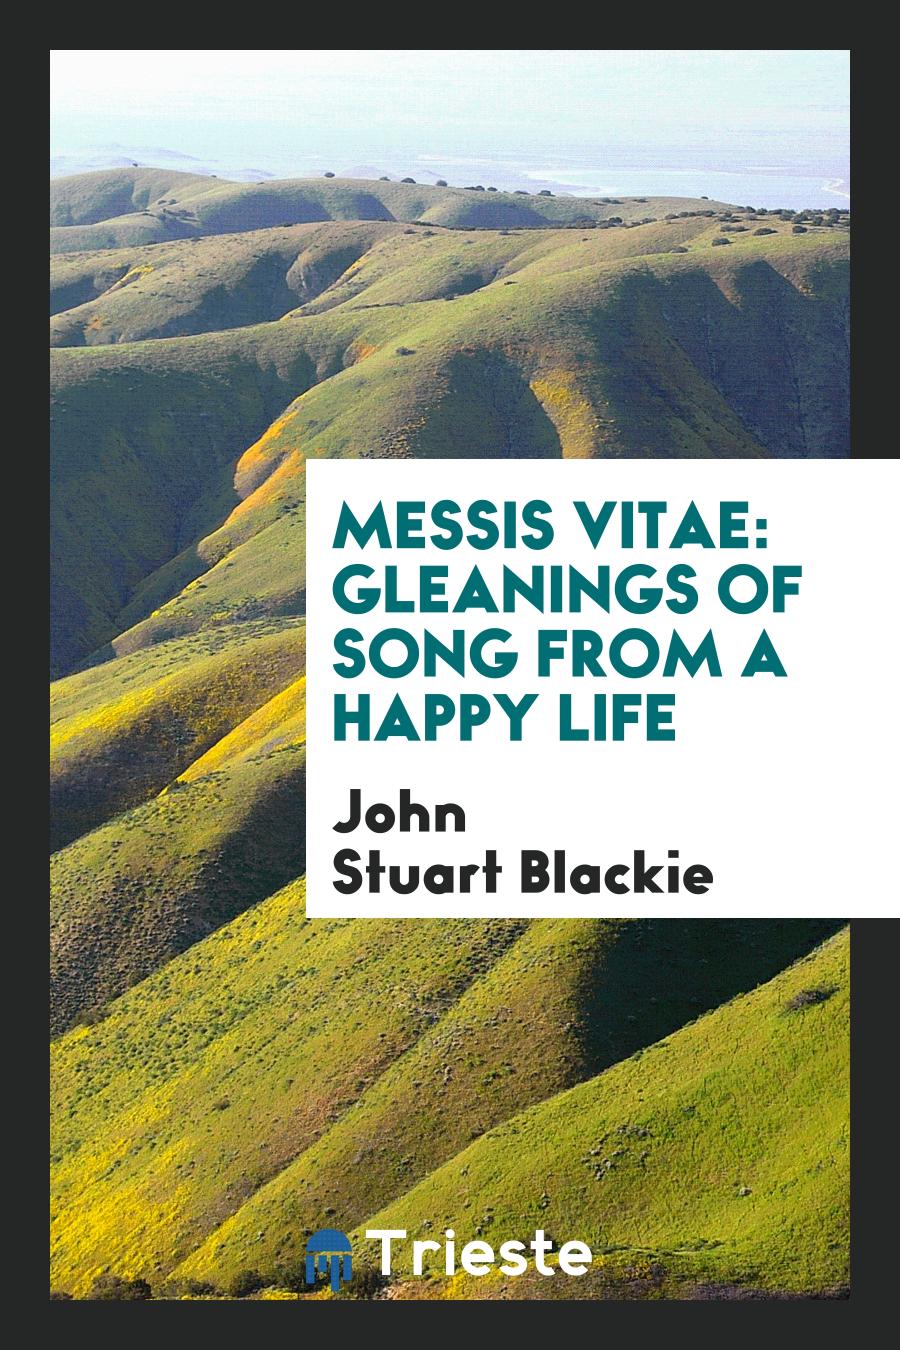 Messis Vitae: Gleanings of Song from a Happy Life